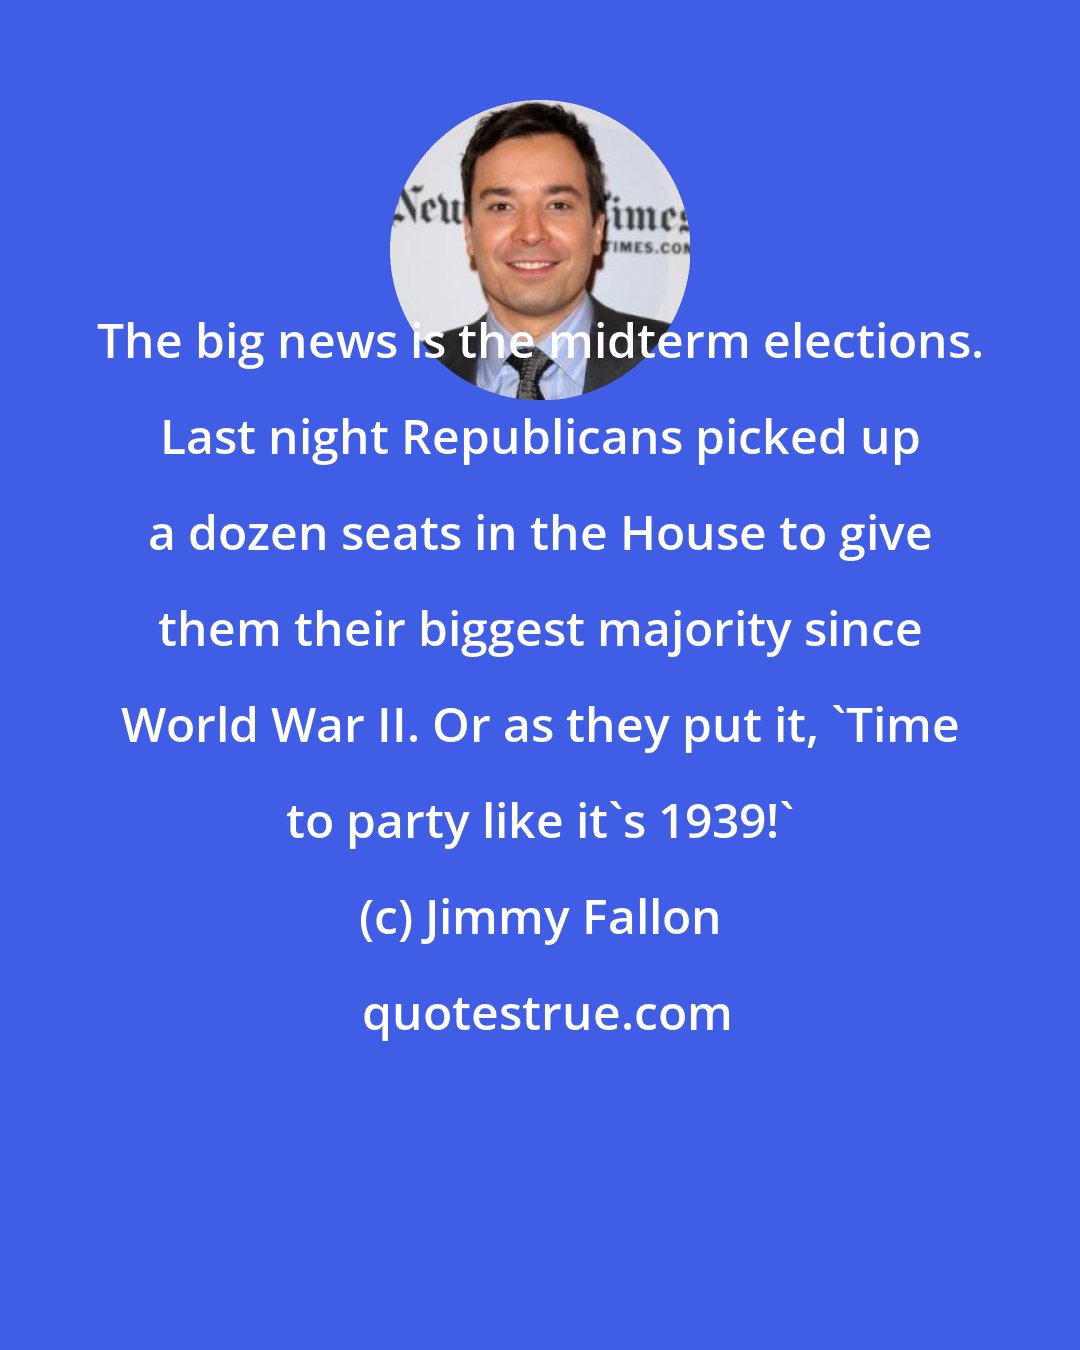 Jimmy Fallon: The big news is the midterm elections. Last night Republicans picked up a dozen seats in the House to give them their biggest majority since World War II. Or as they put it, 'Time to party like it's 1939!'